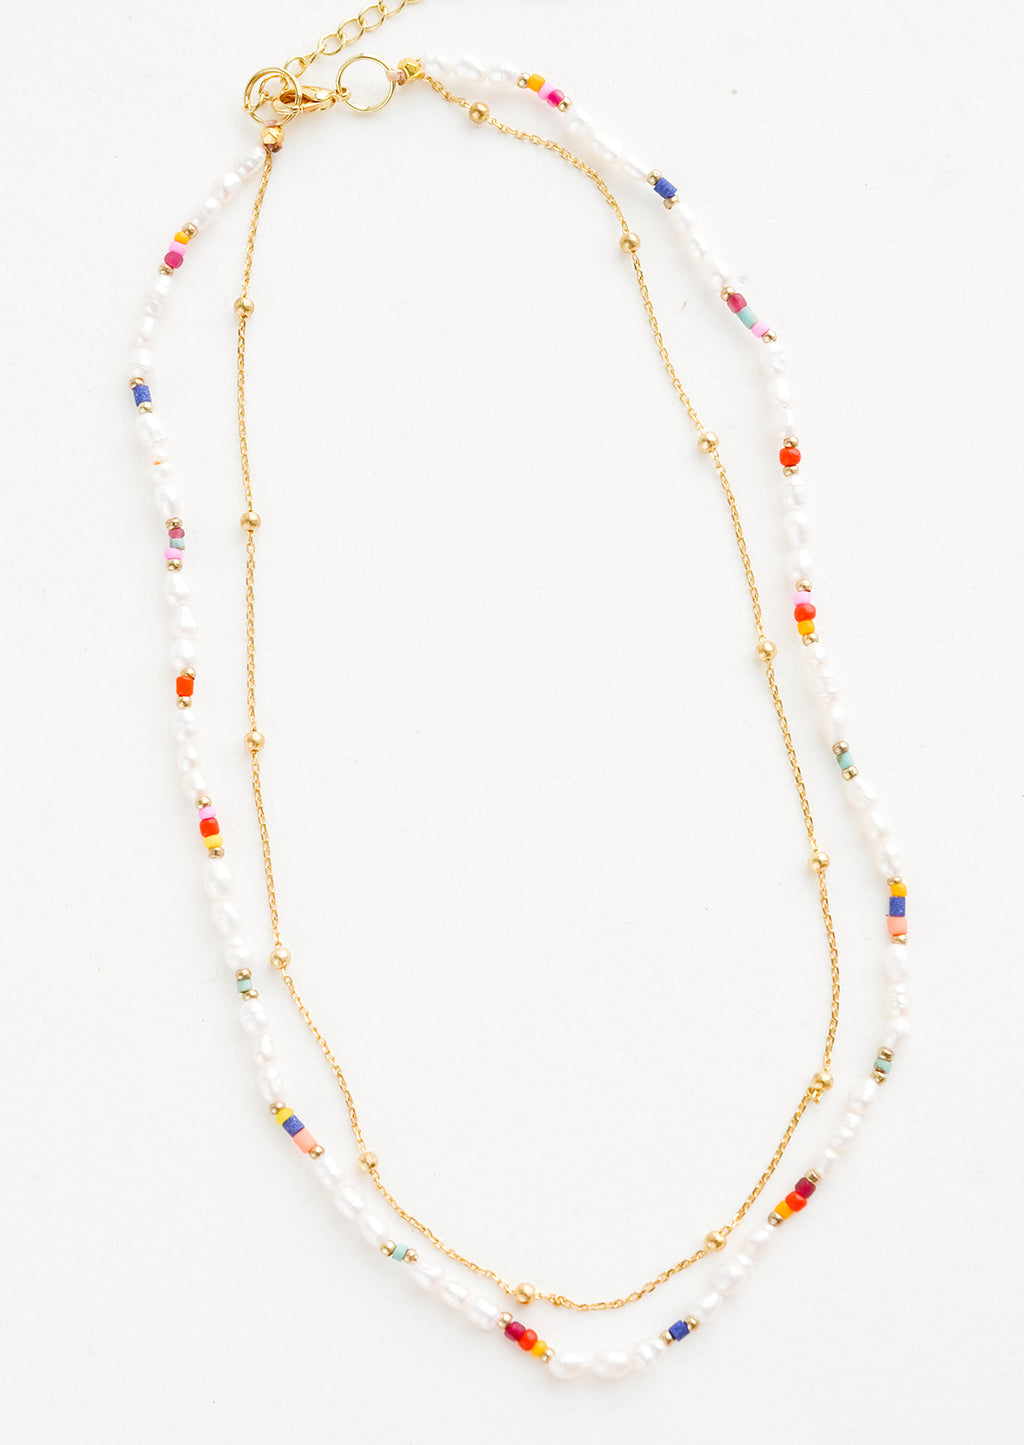 1: Double layer necklace with beaded pearl & glass bead layer and inner dainty gold chain layer